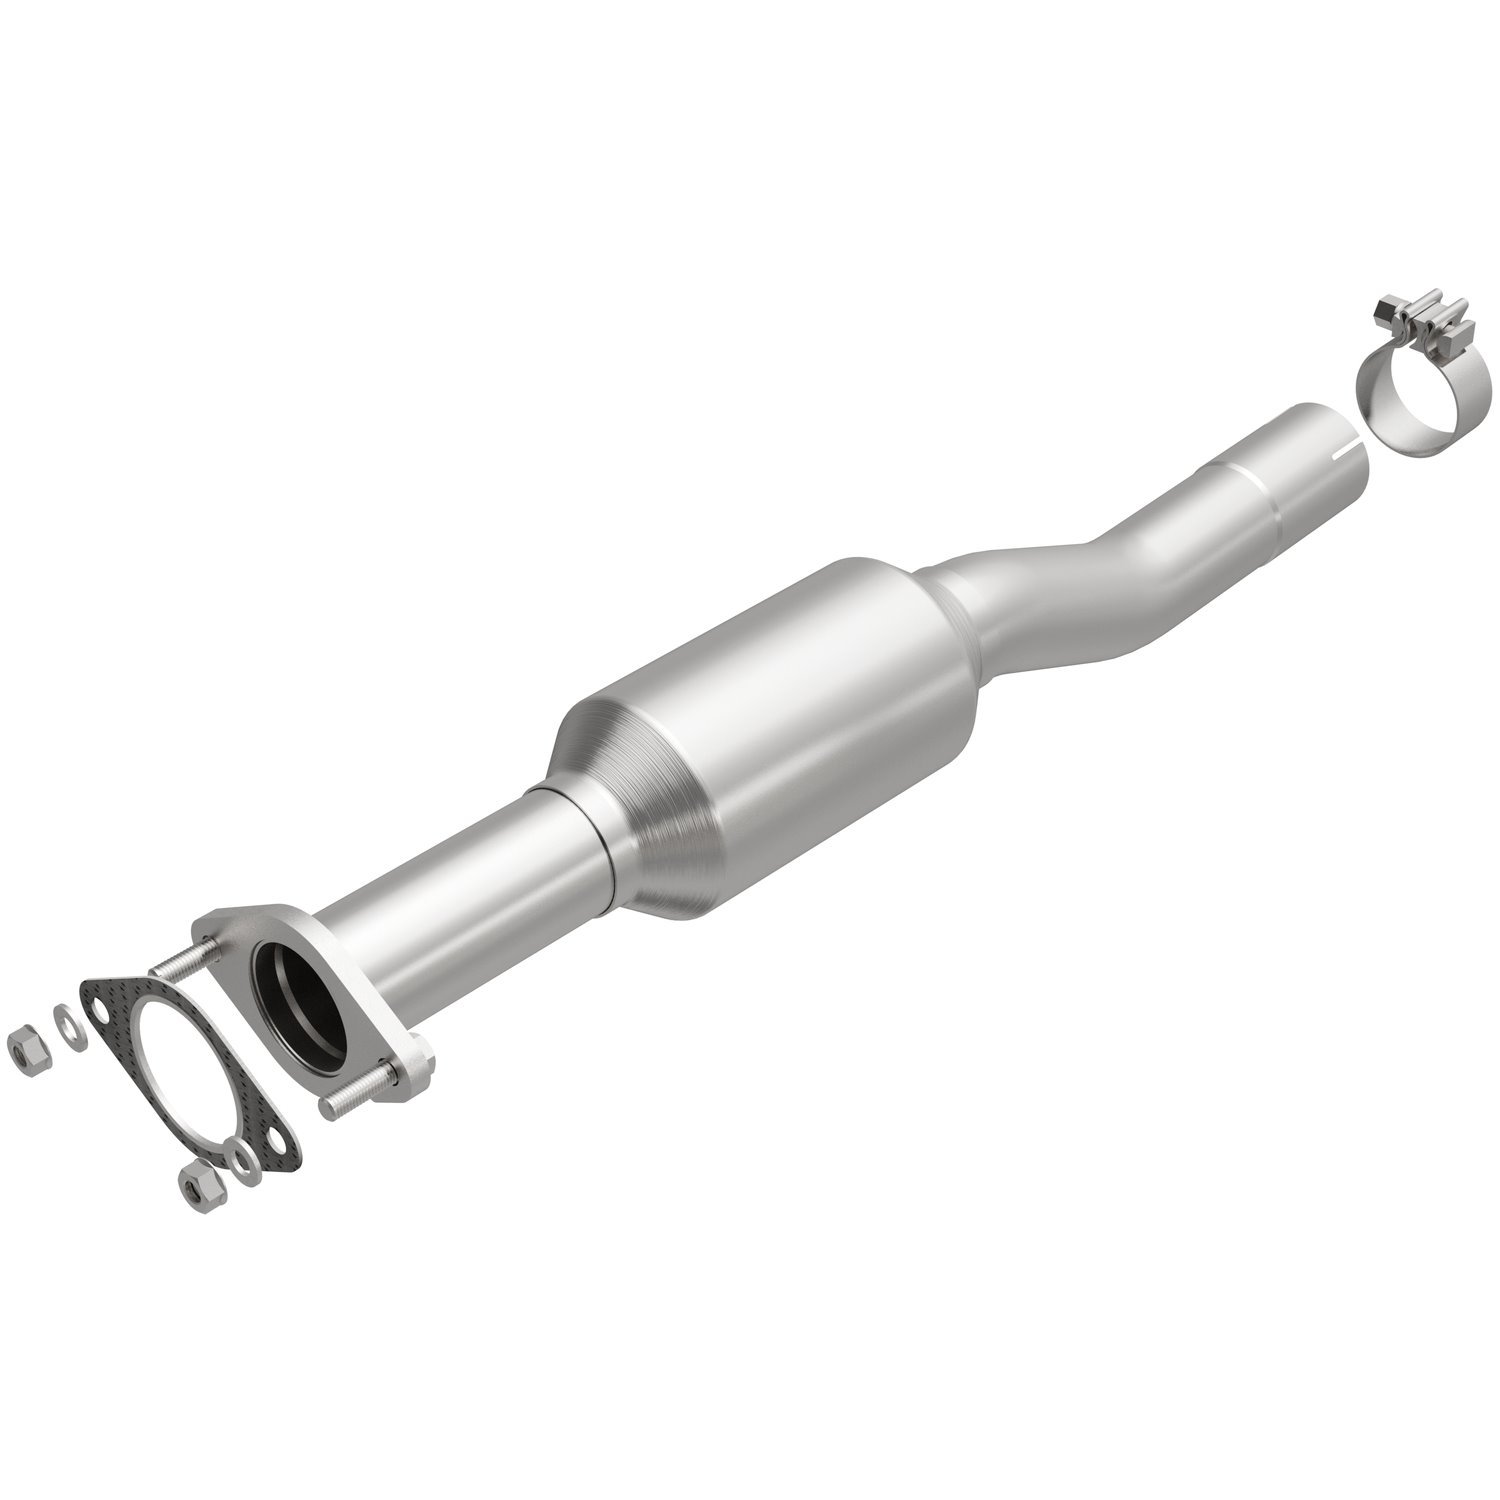 2017-2019 Ford Escape OEM Grade Federal / EPA Compliant Direct-Fit Catalytic Converter